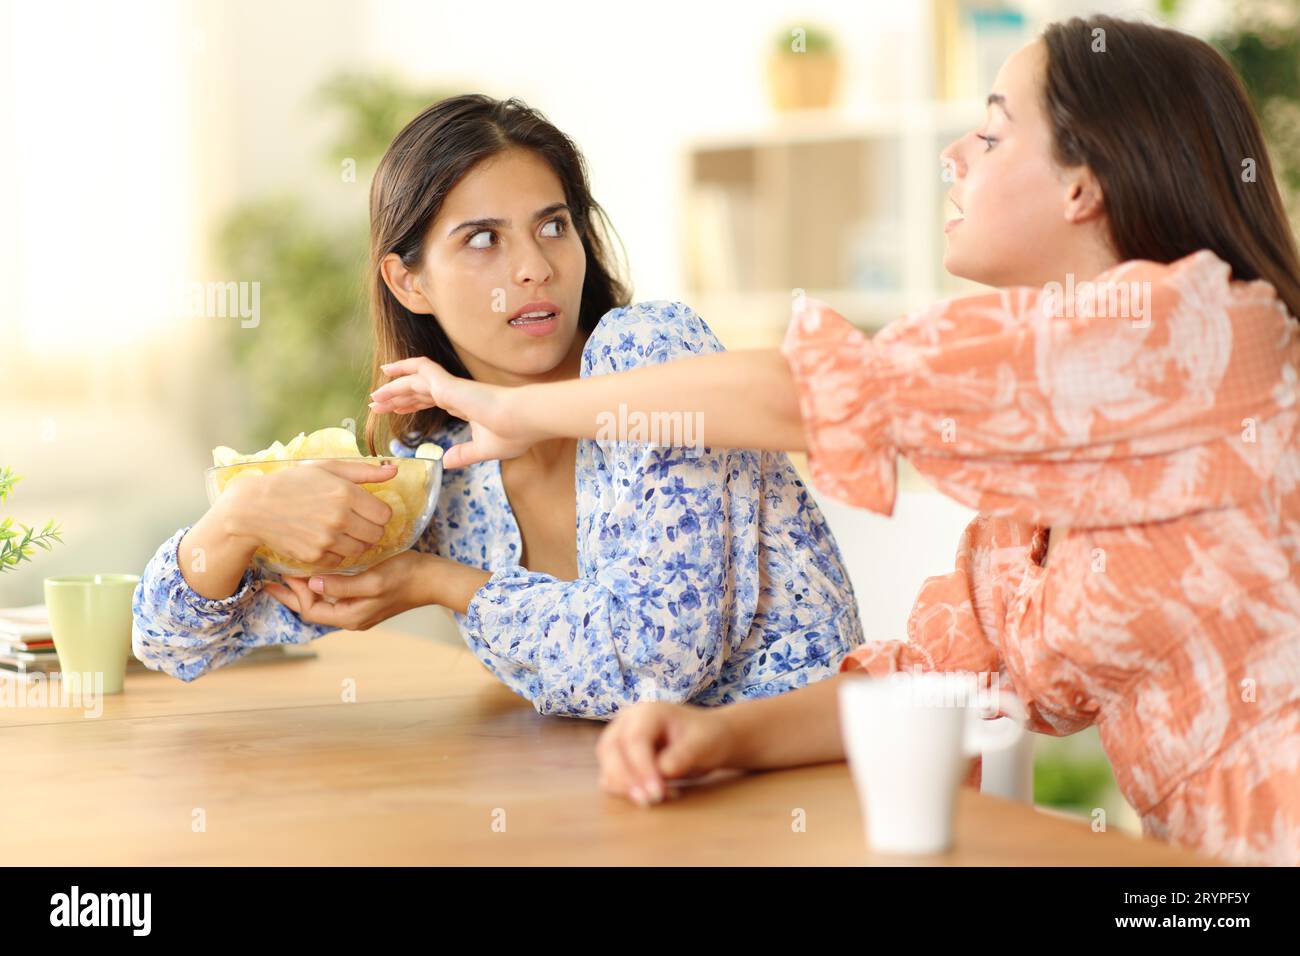 Woman trying to eat potatto chips and selfish friend avoiding at home Stock Photo